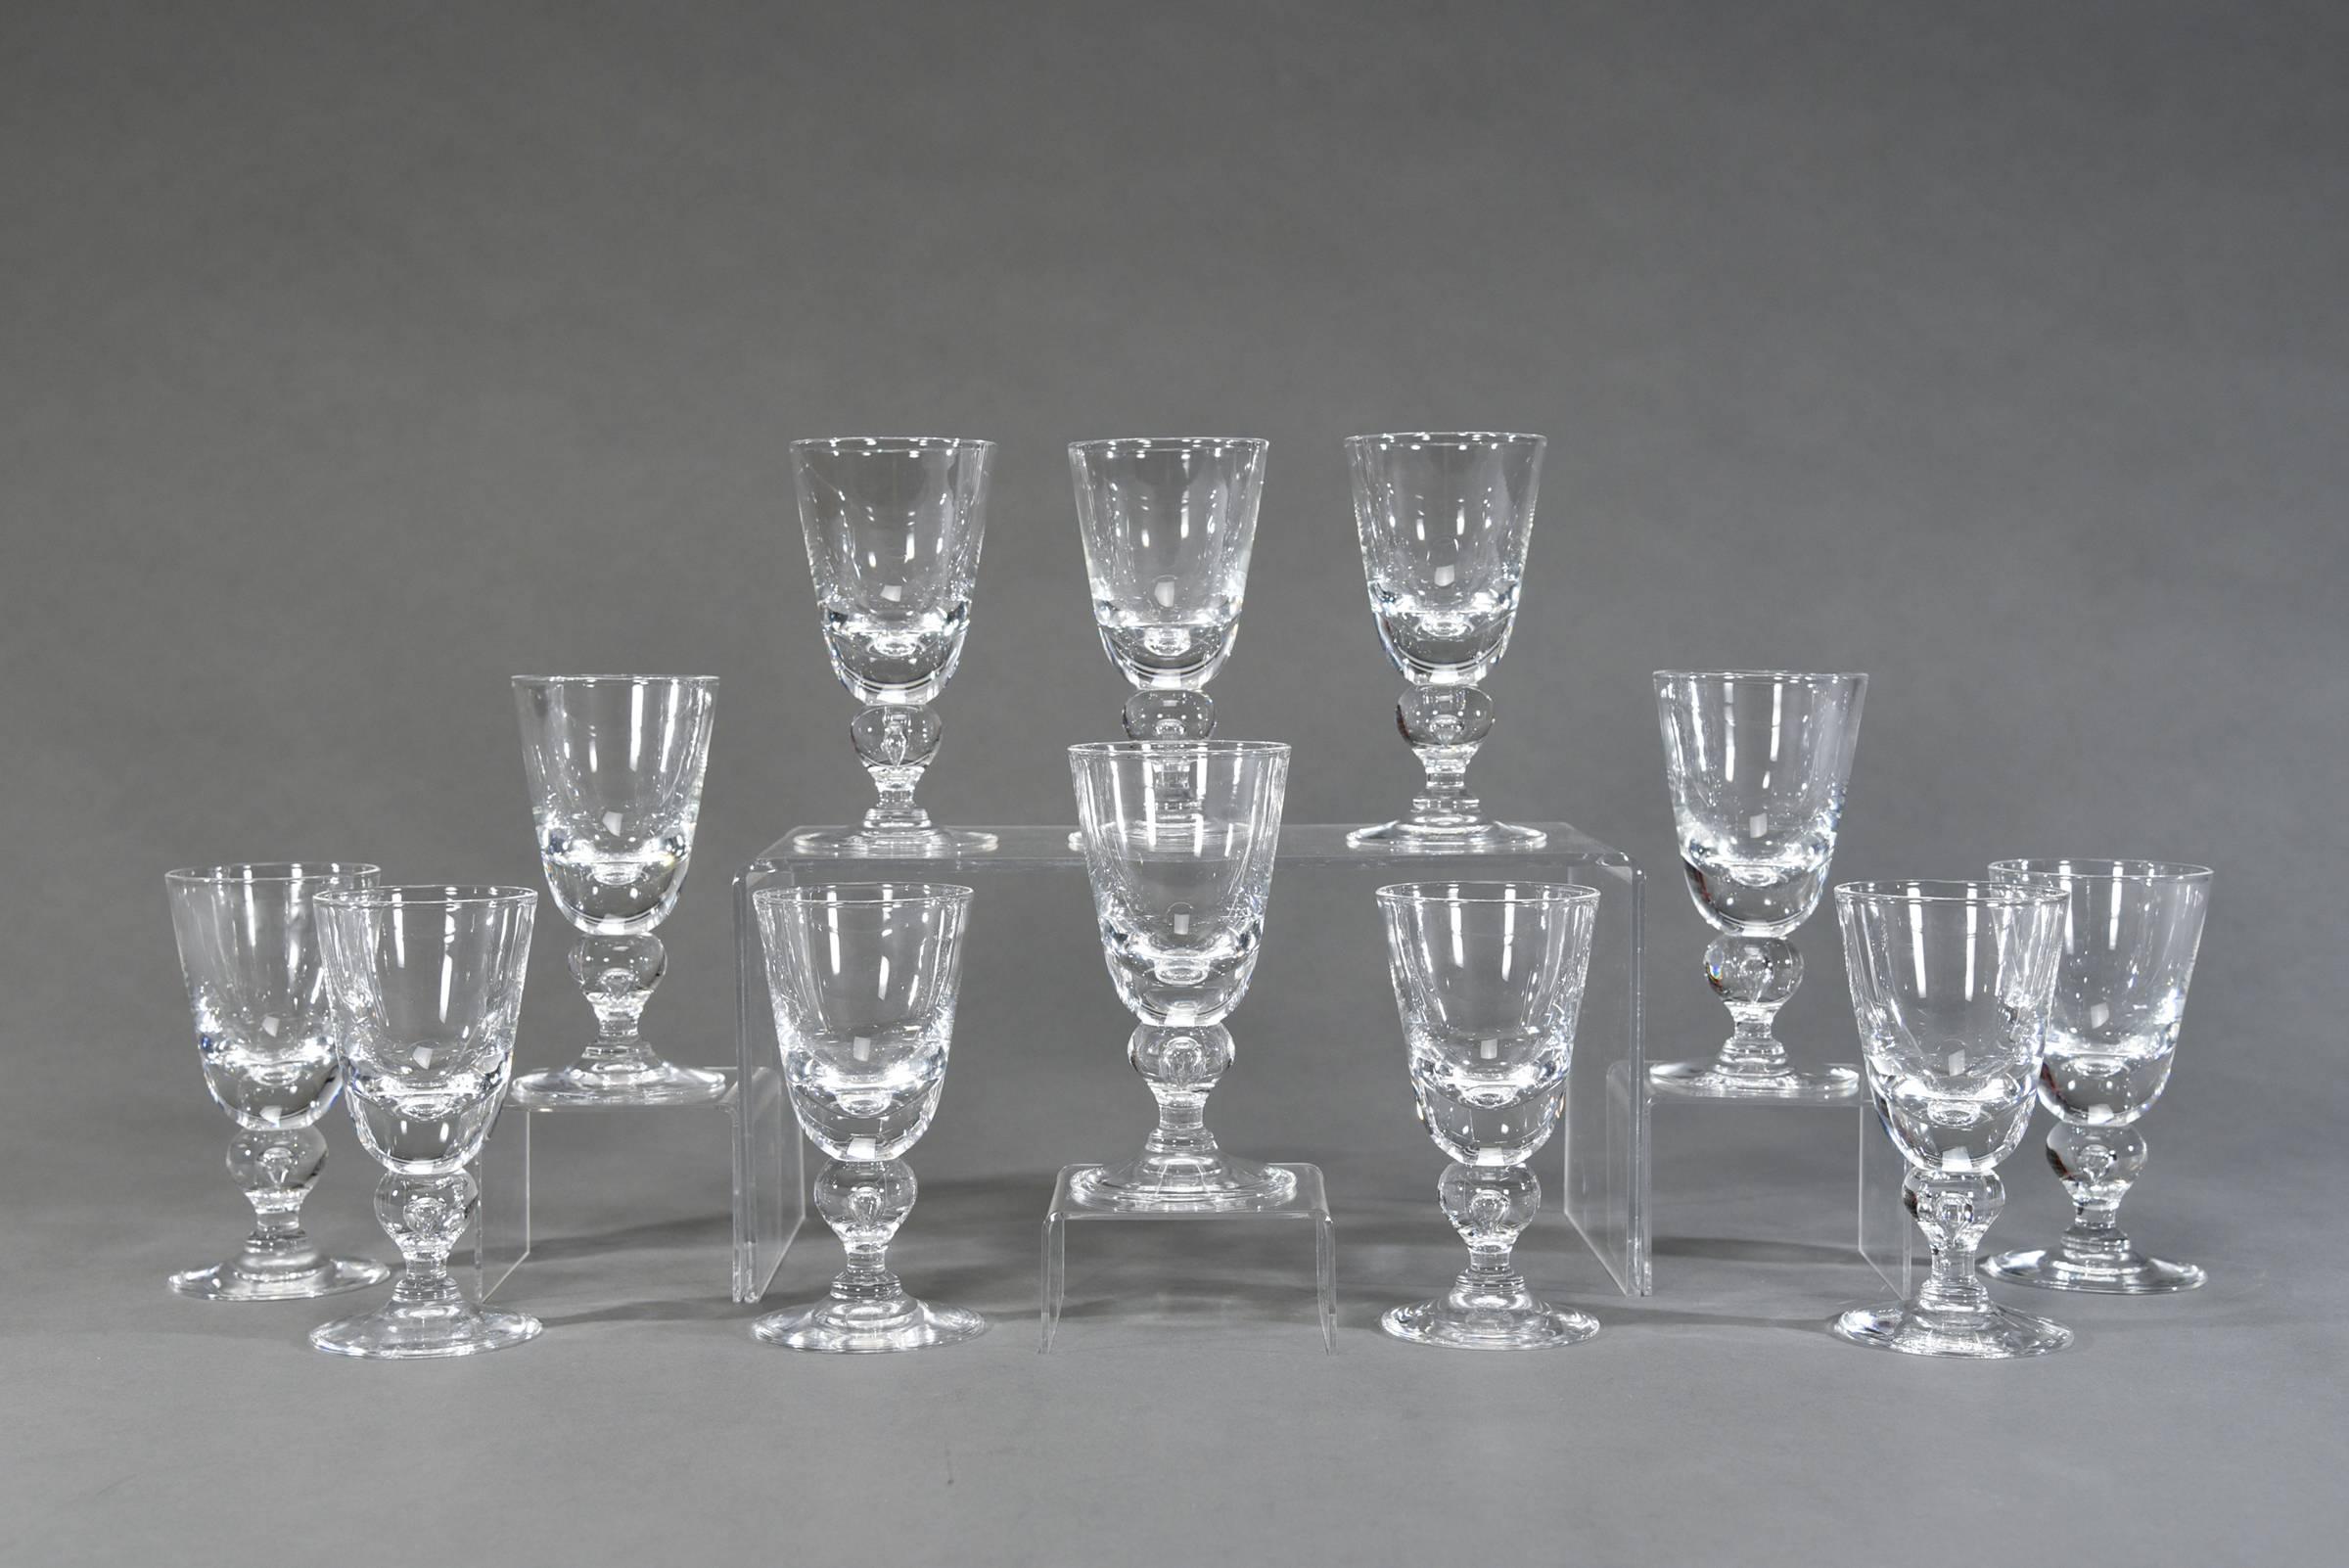 One of the most desirable patterns of Steuben's clear stemware services is this Classic baluster shaped goblet, pattern # 7877, designed by George Thompson. Handblown crystal with a low center of gravity, the perfect weight, which feels amazing in